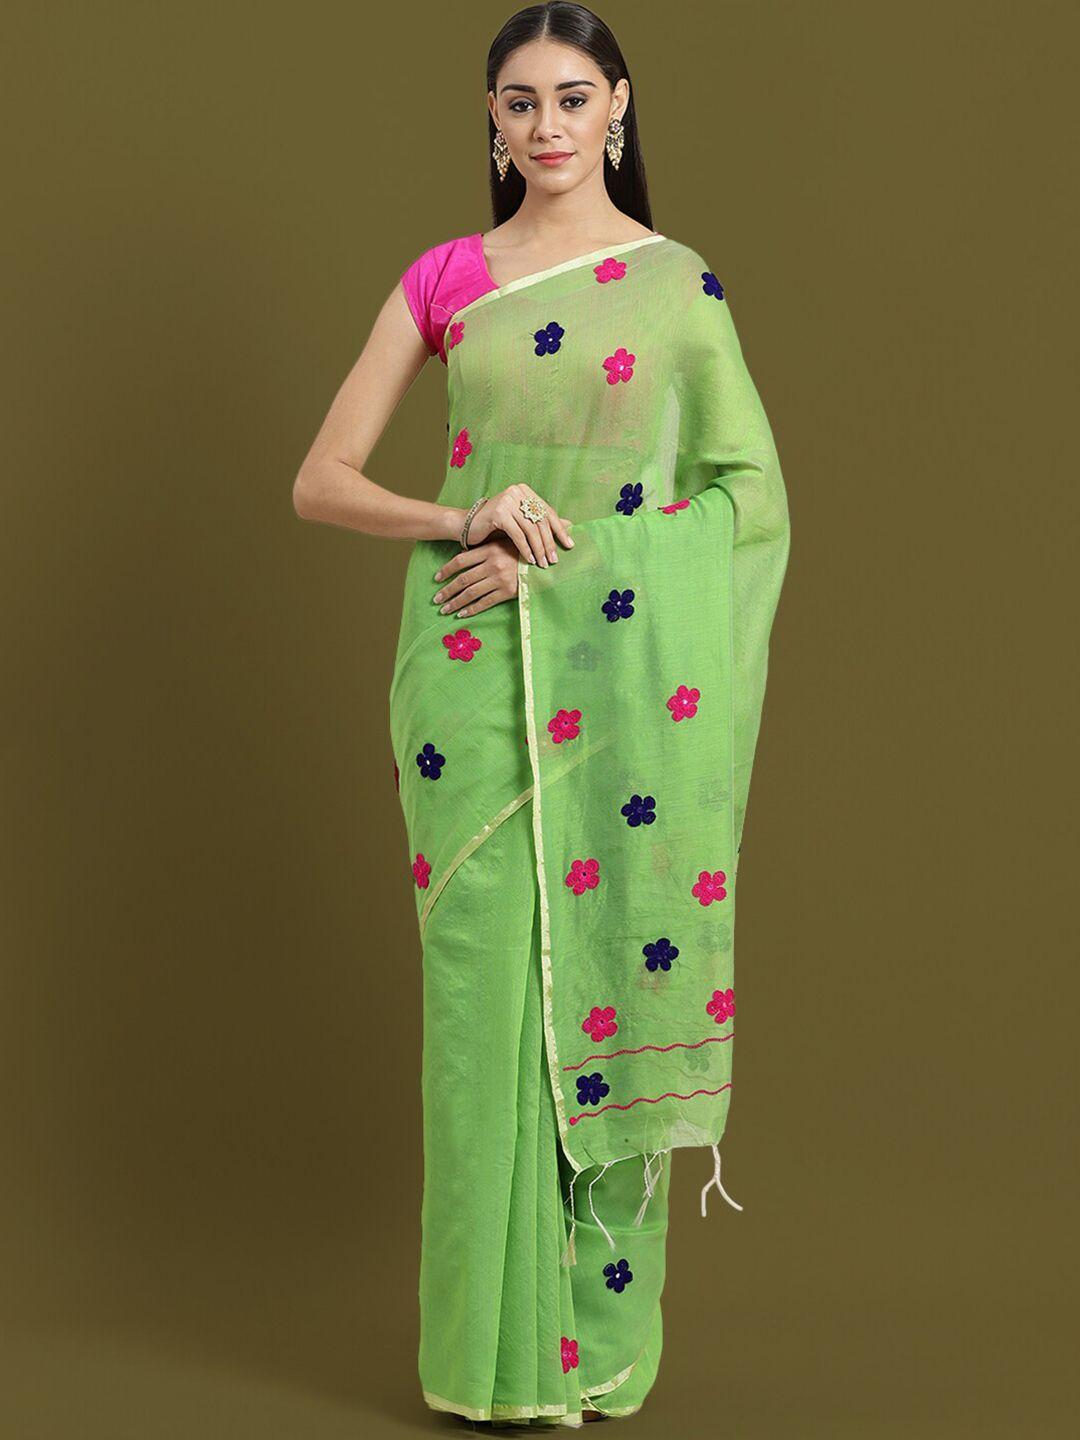 house of arli floral embroidered saree